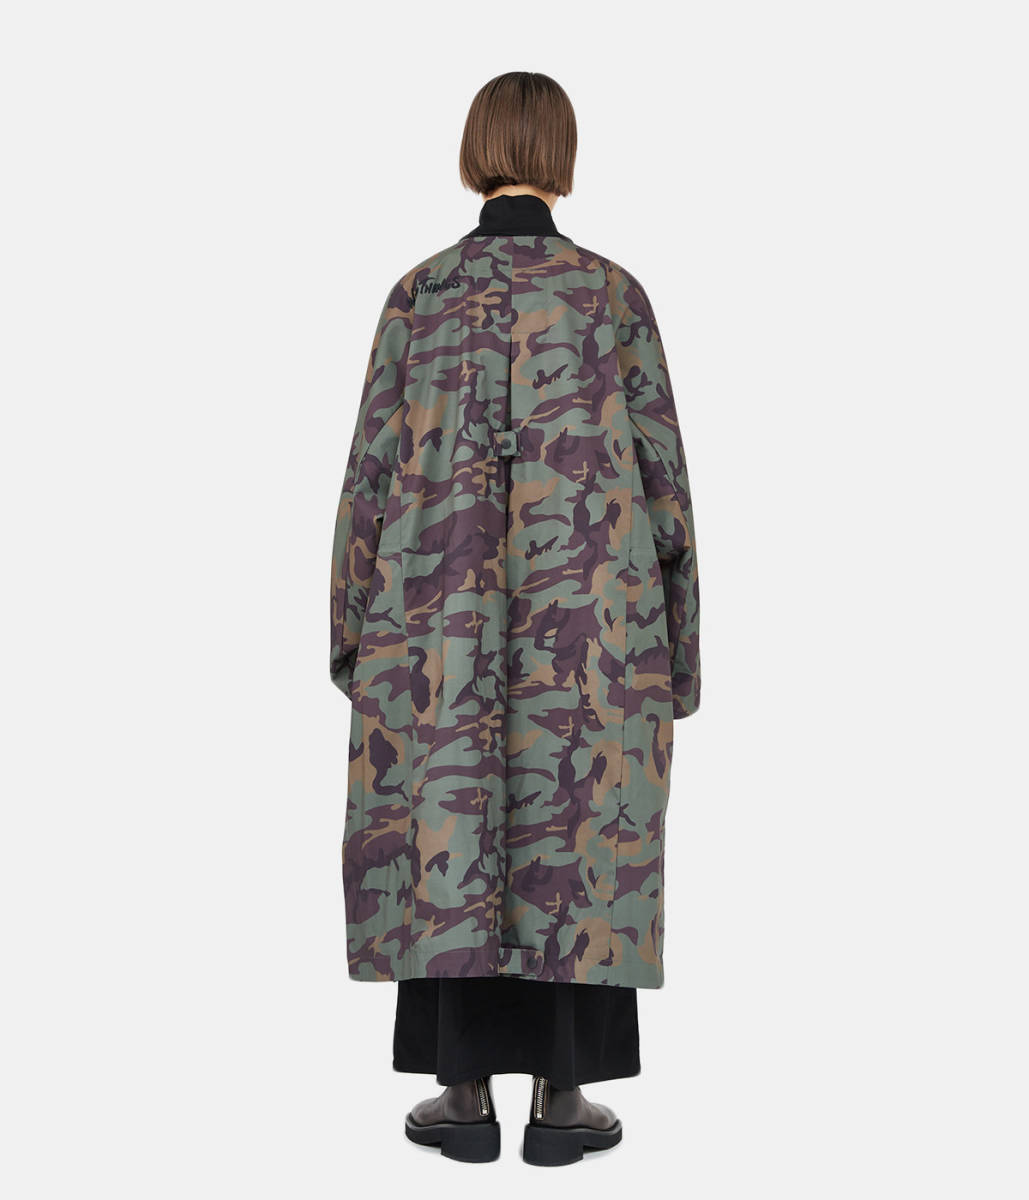  regular price 66000 jpy new goods WILD THINGS × JUN MIKAMI 1-WT collaboration camouflage shell coat WT22478ST-JM Jun mikami Wild Things 